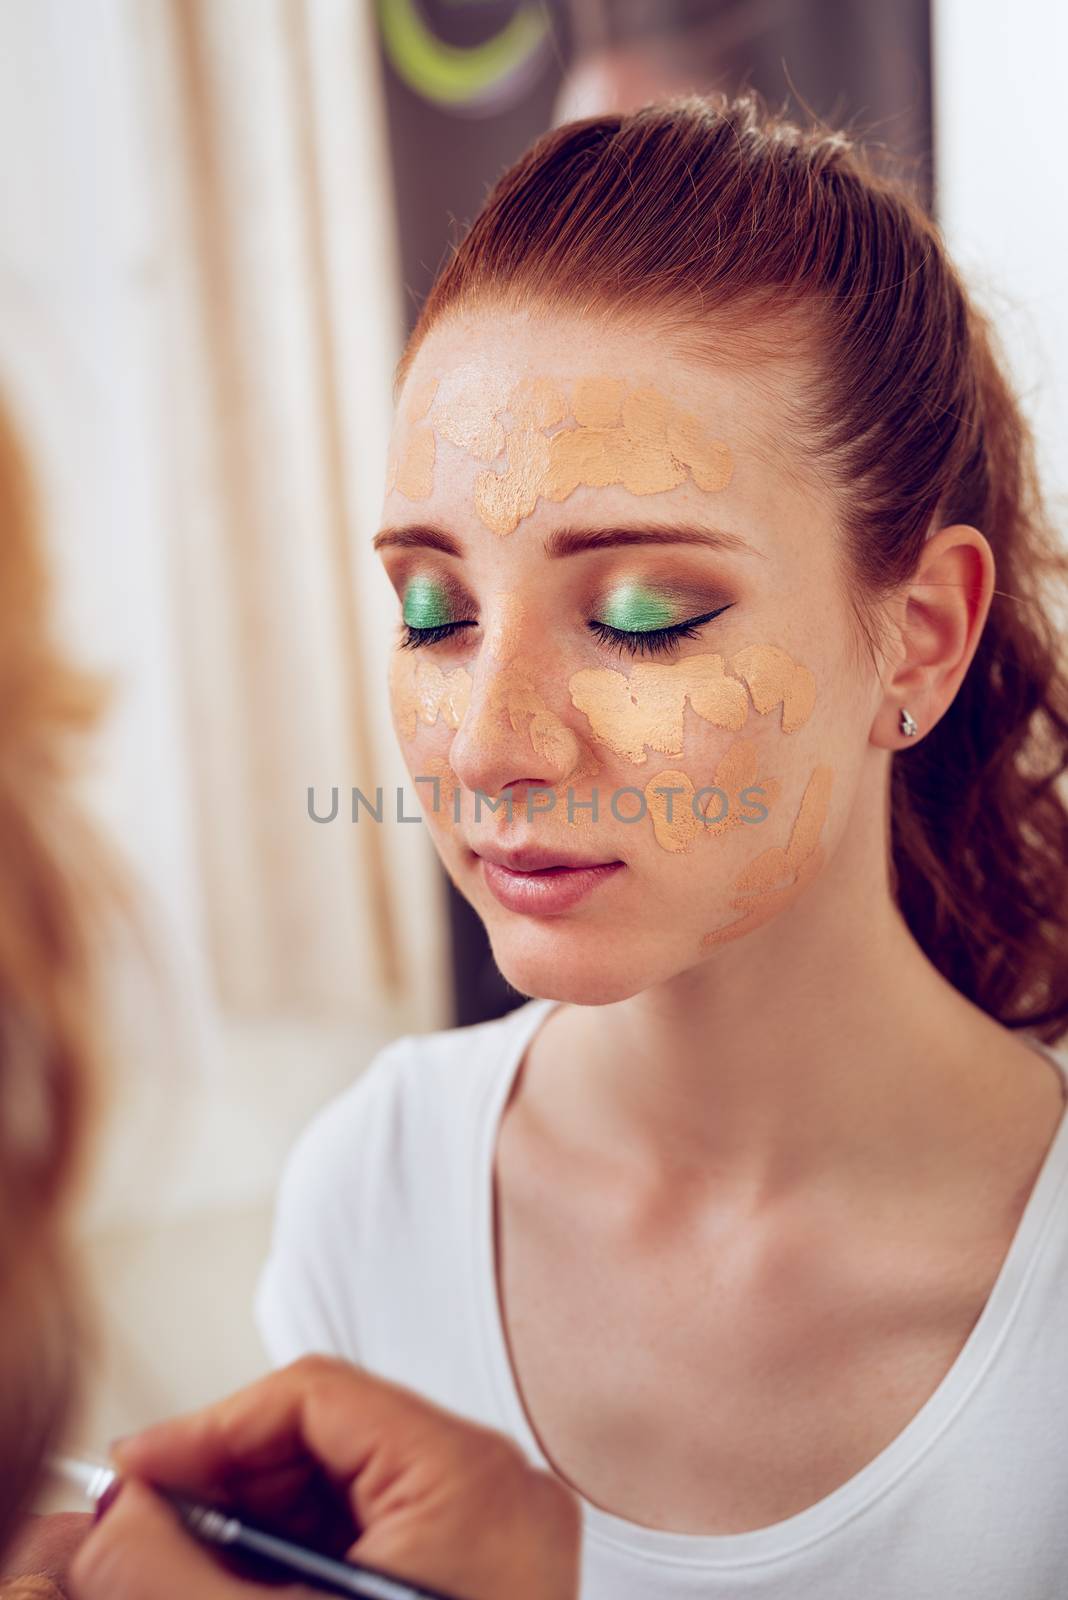 Makeup artist applying powder on a beautiful young woman's face.